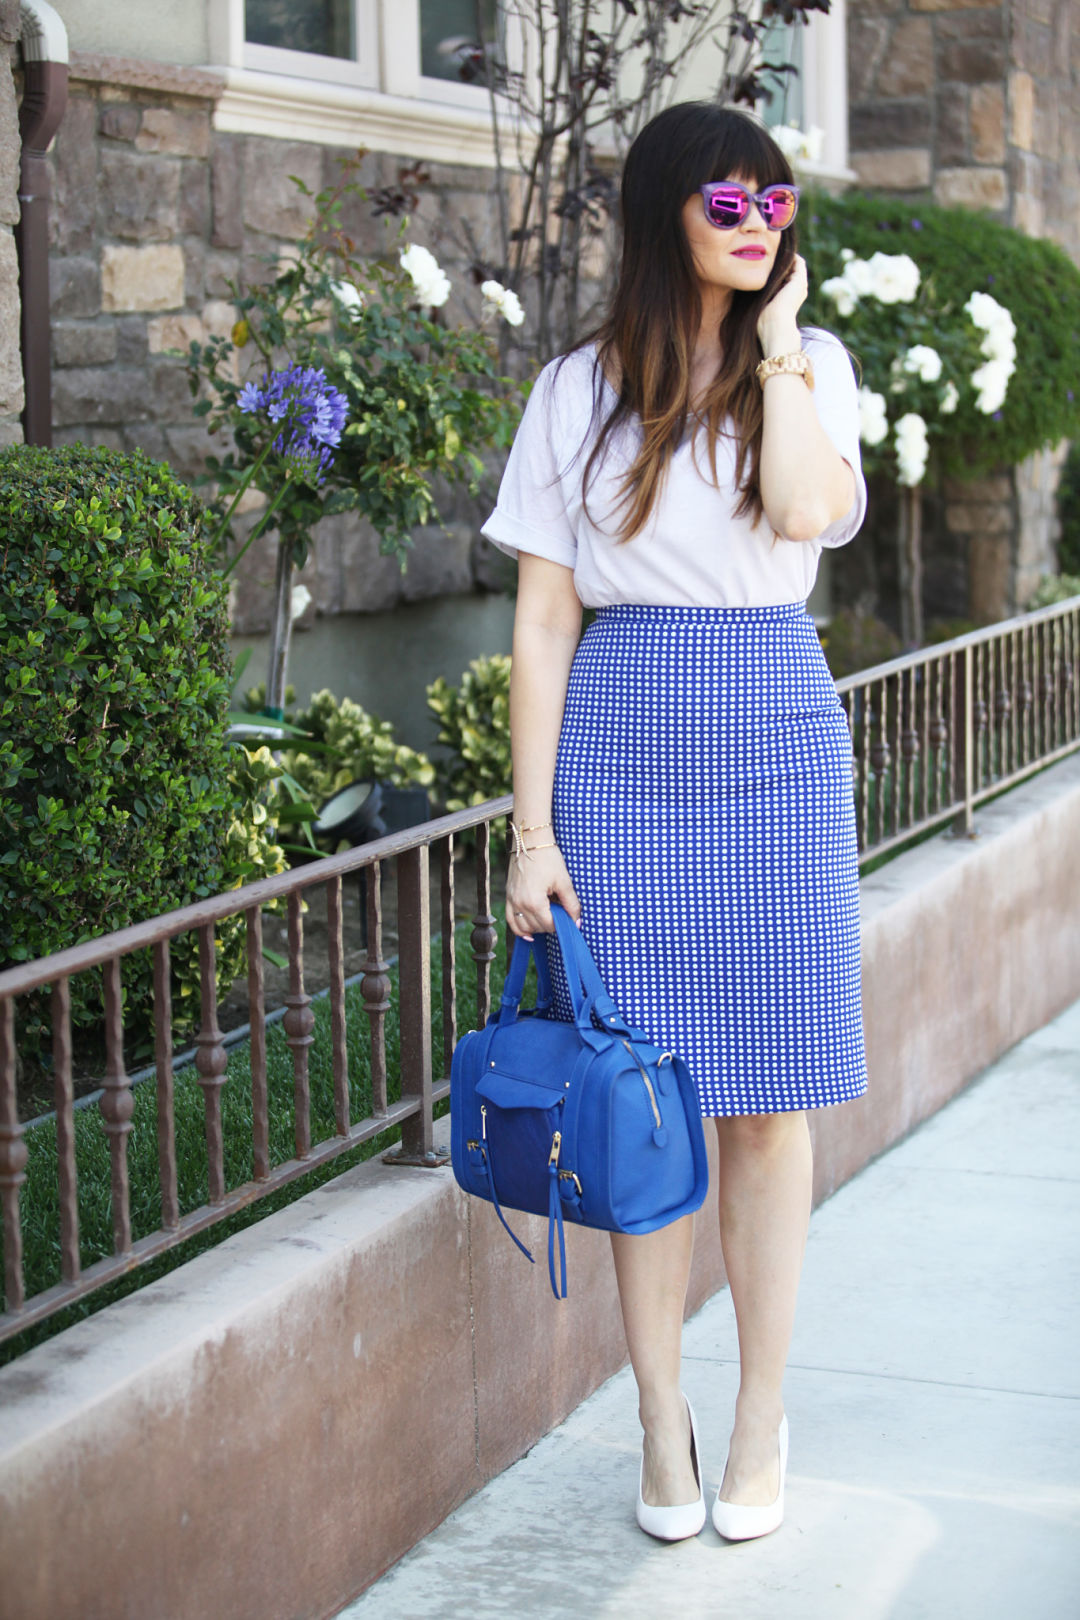 Polka Dot Skirt and Breaking Out of a Style Rut - Glam Latte